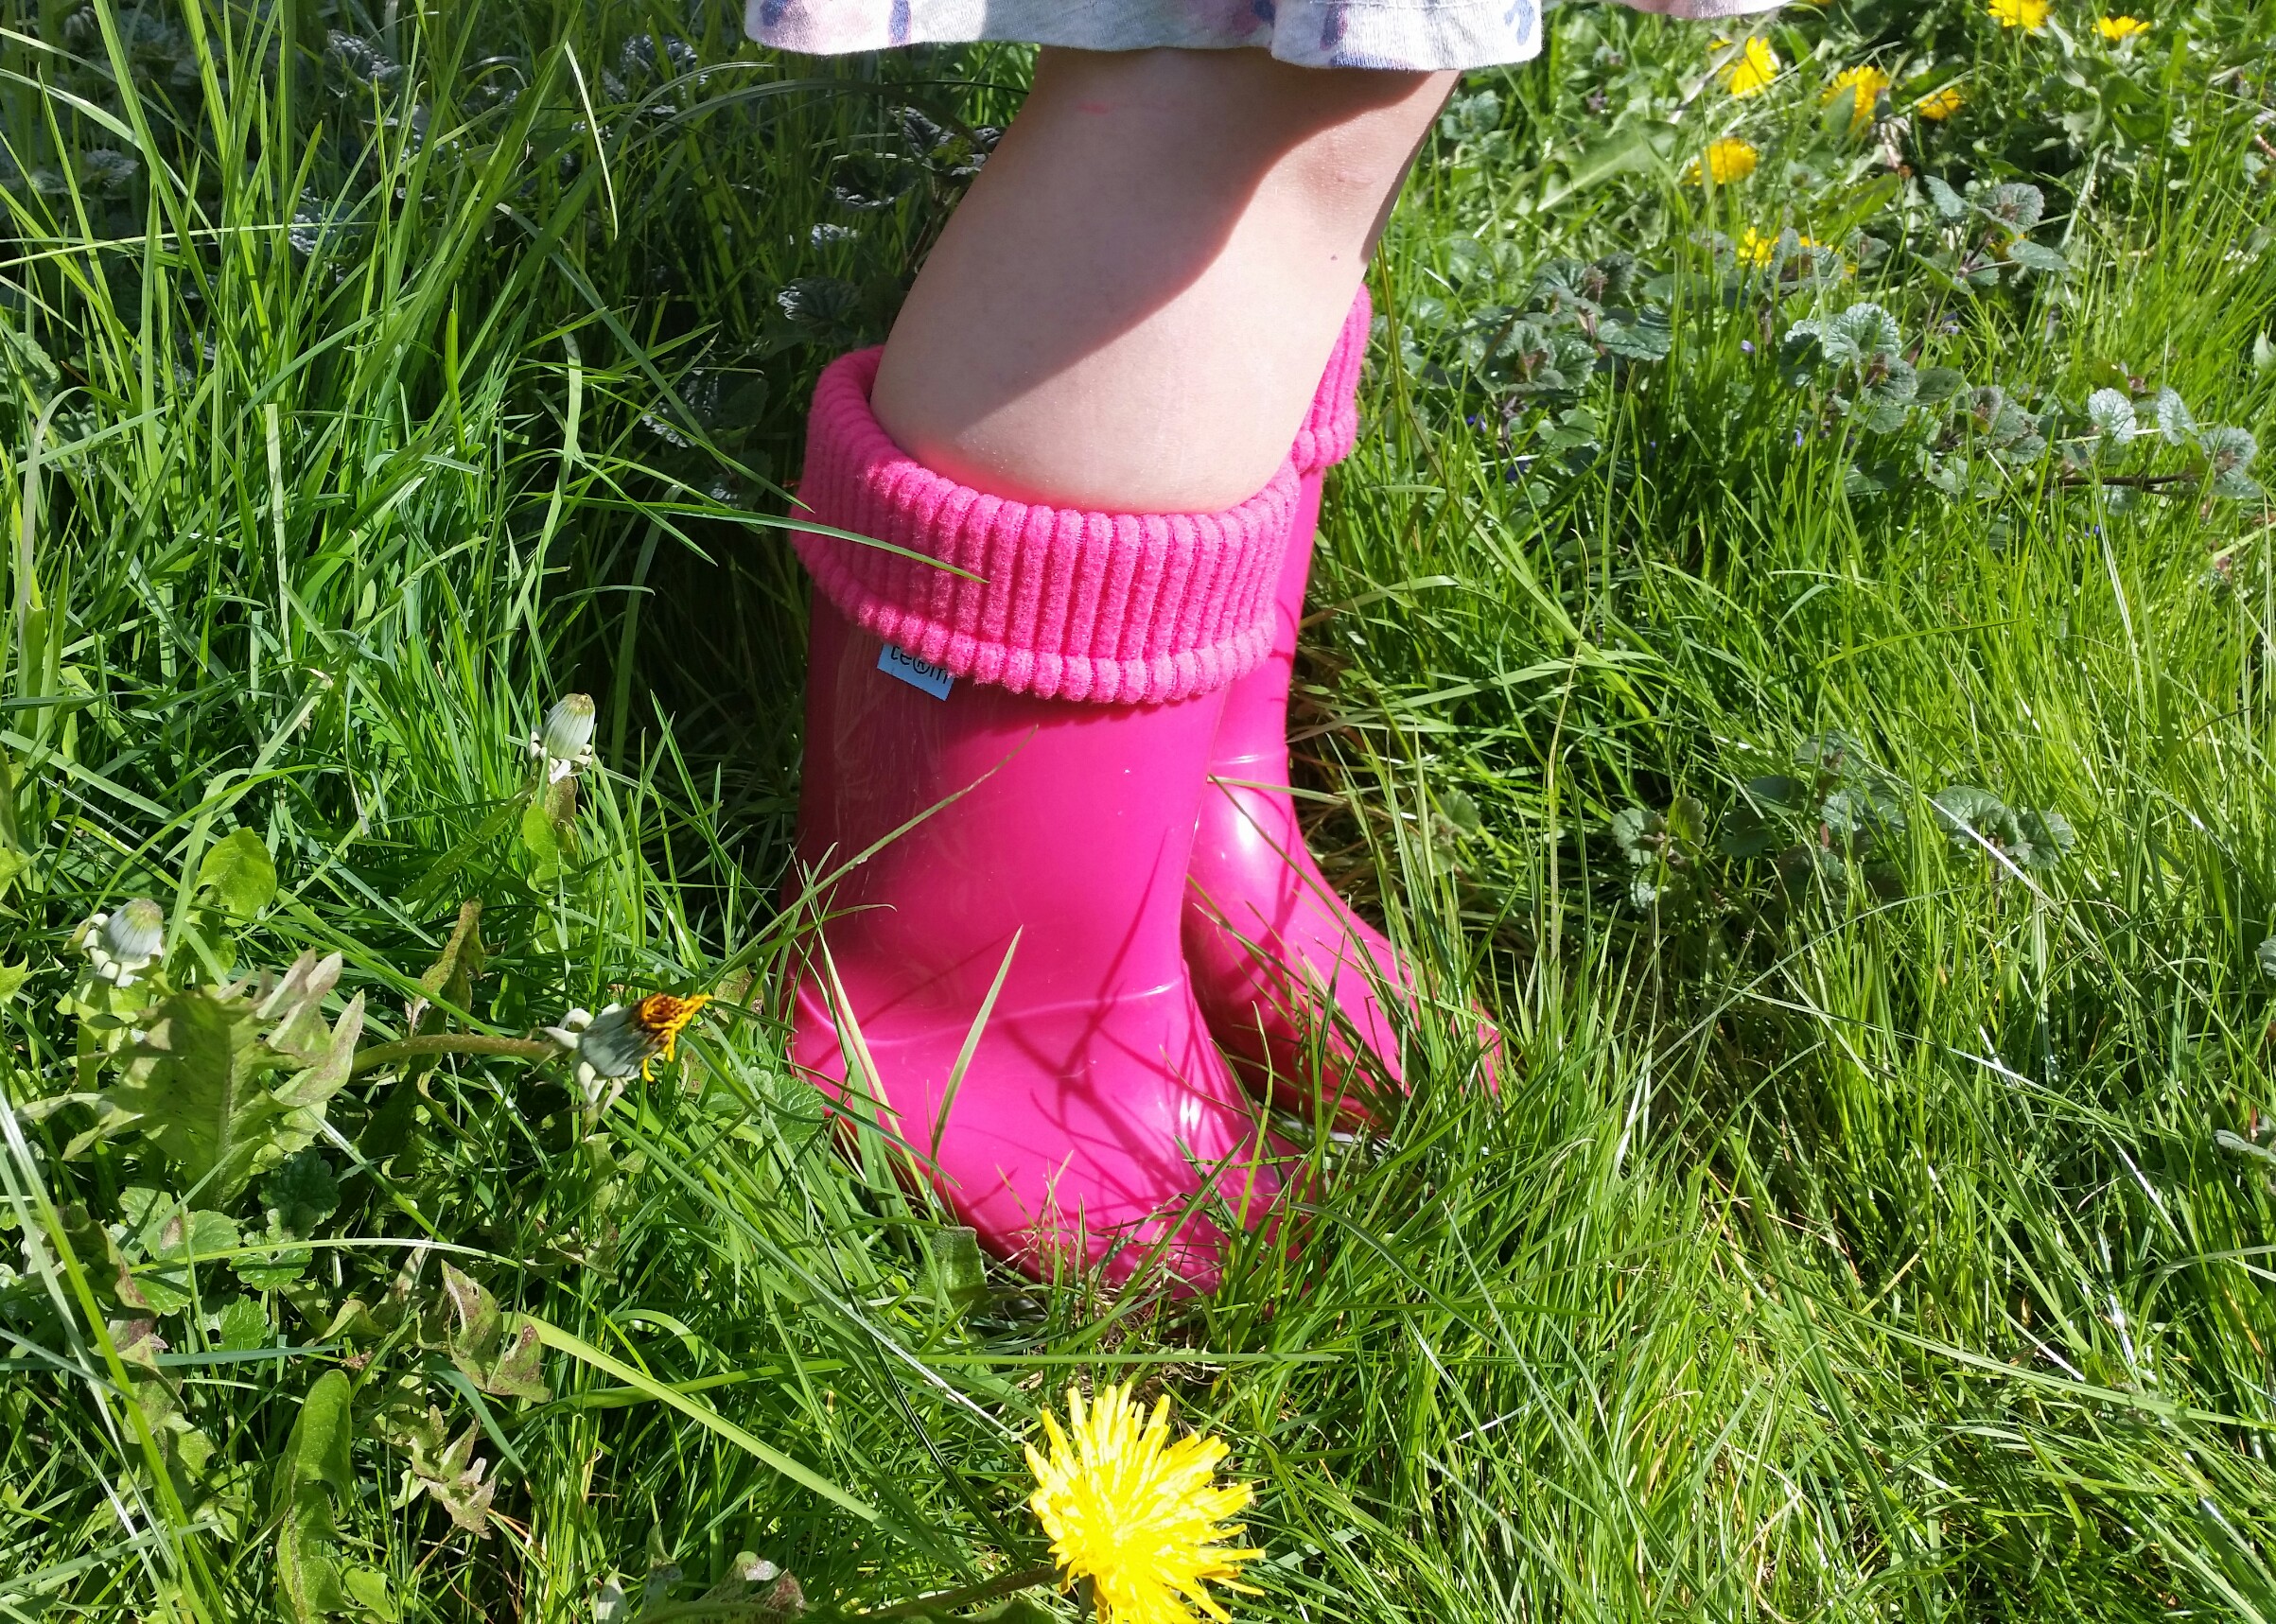 Term wellies, footwear, outdoors, review, Living Life Our Way, get outside, #LivingLifeWild